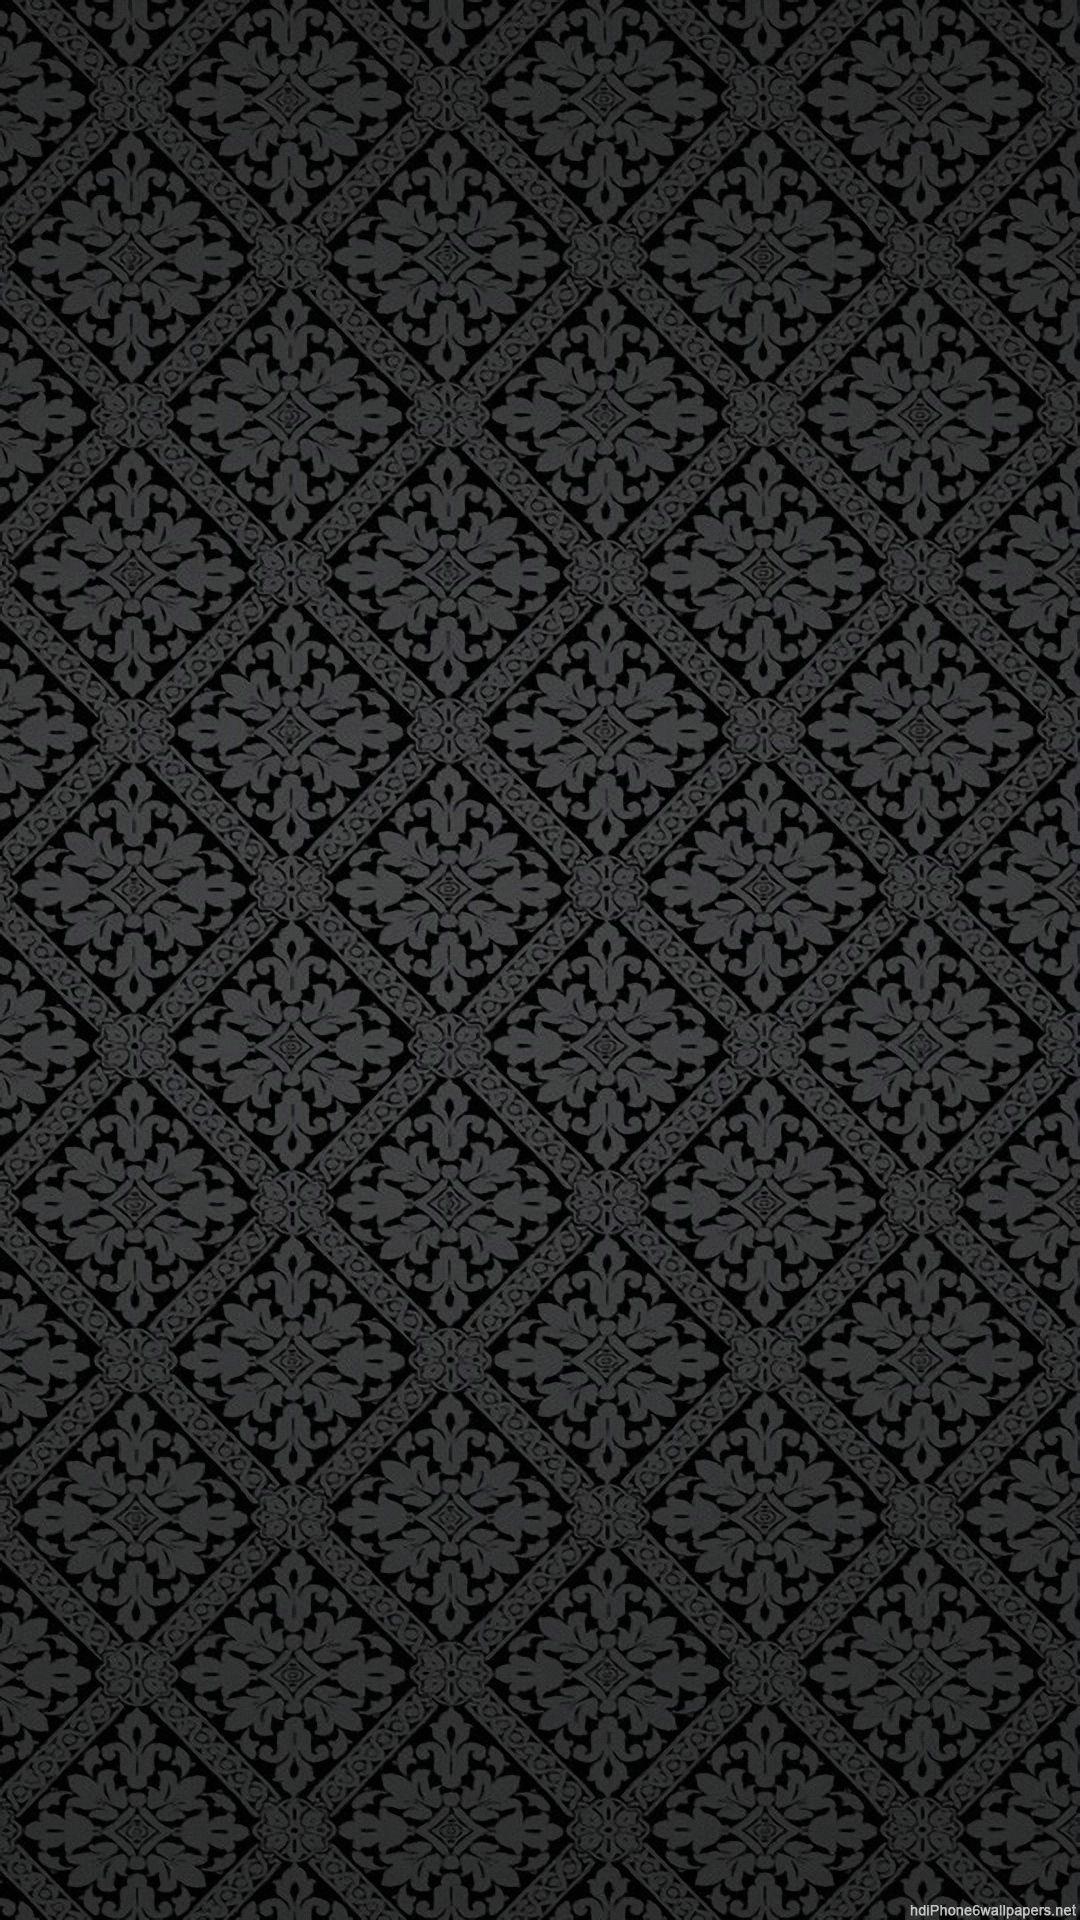 Black Iphone 6 Plus Wallpapers Top Free Black Iphone 6 Plus Backgrounds Wallpaperaccess,Where To Hang Curtains With Craftsman Trim